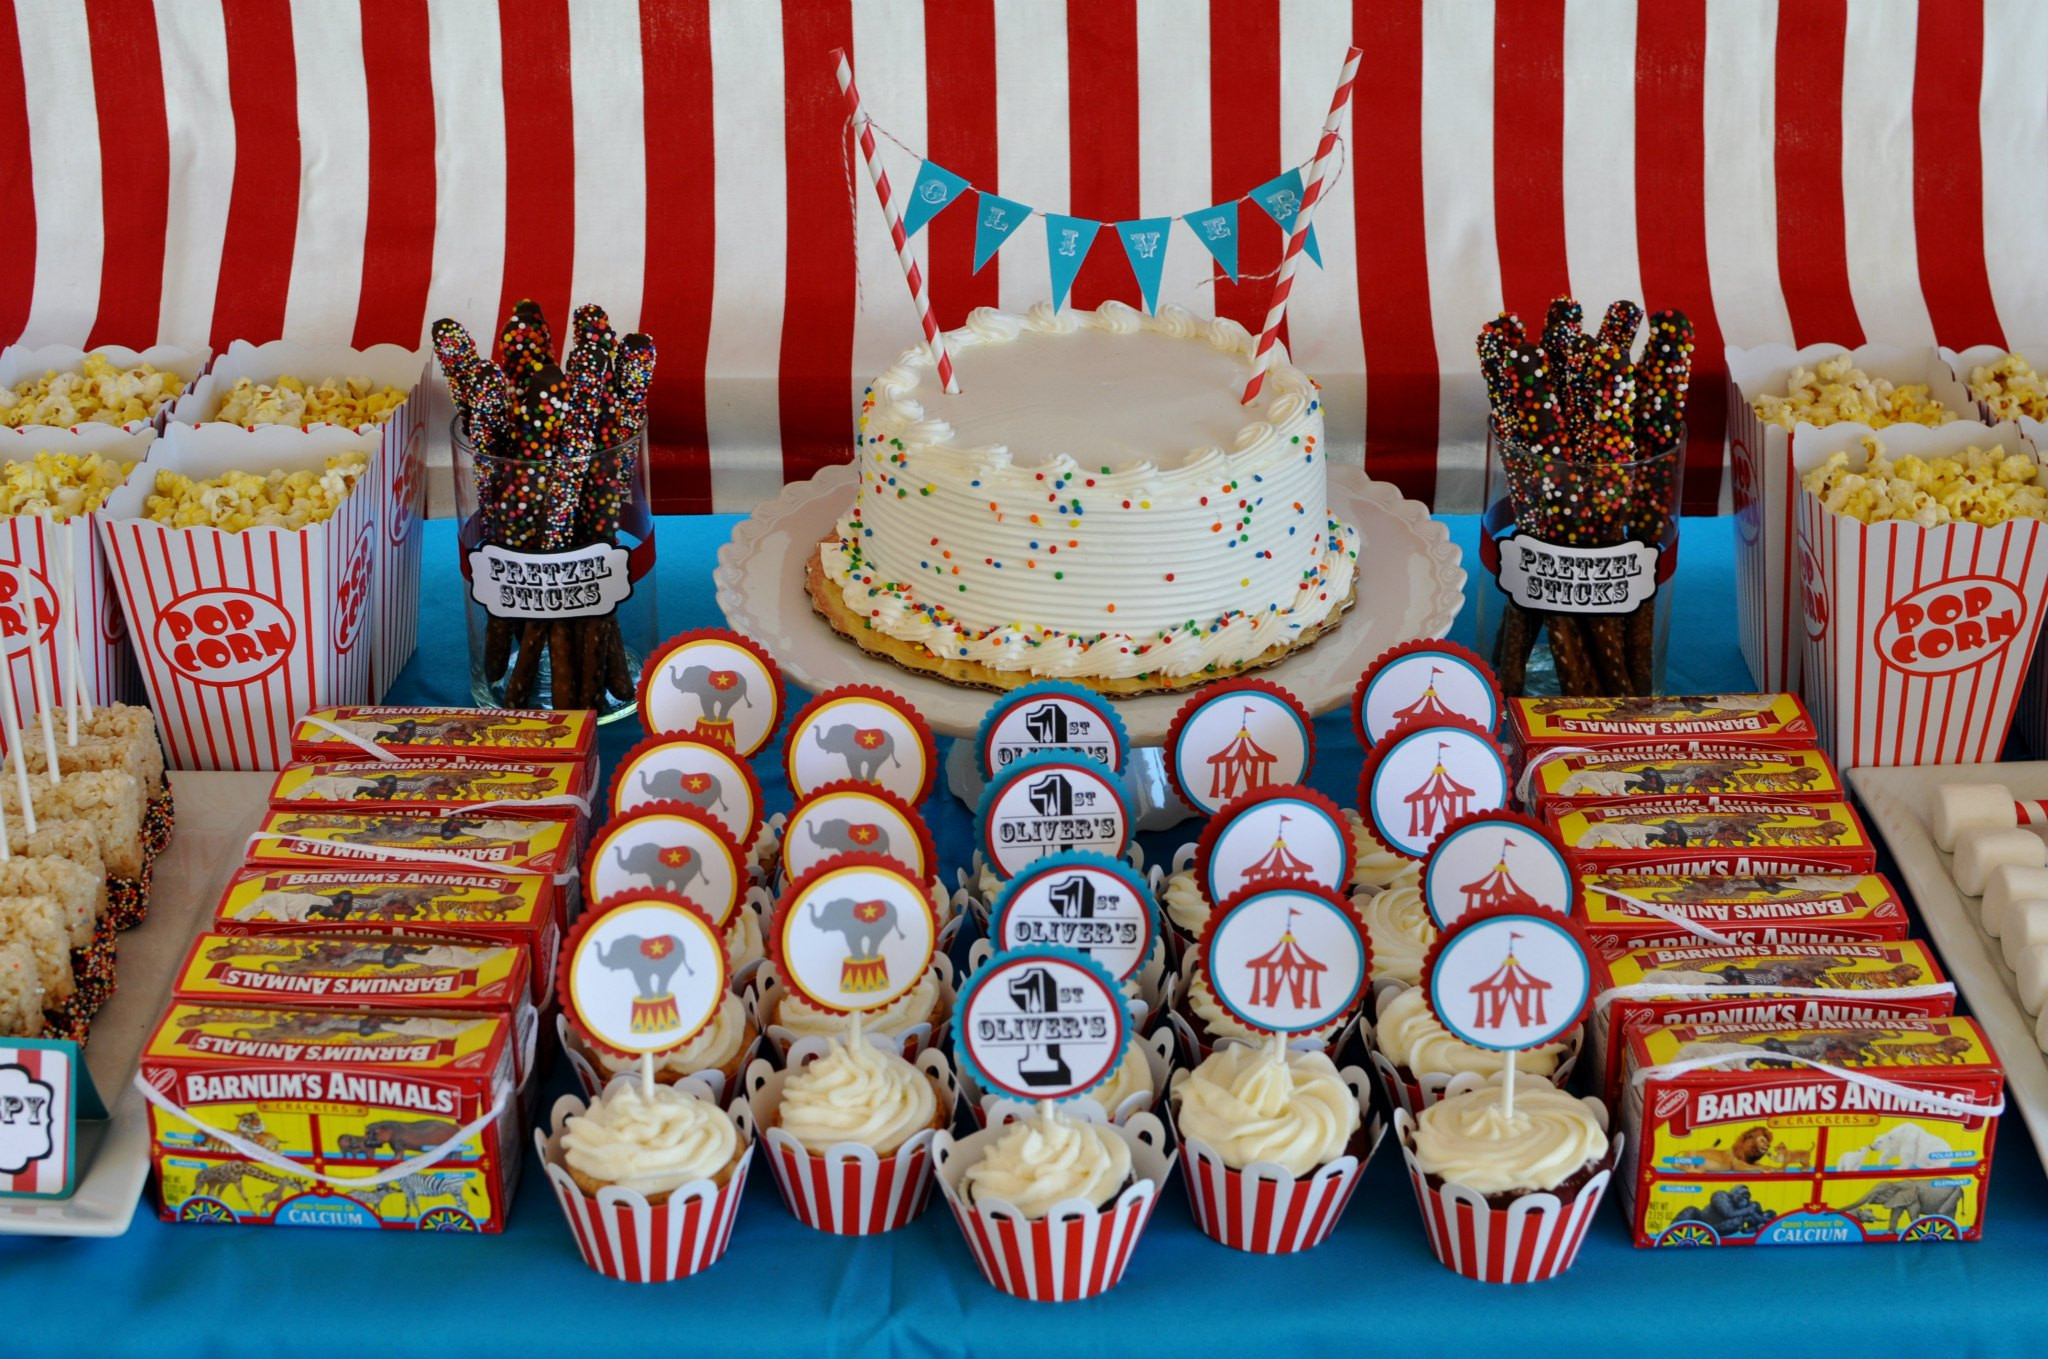 Carnival Birthday Party Decorations
 Big Top Birthday Party